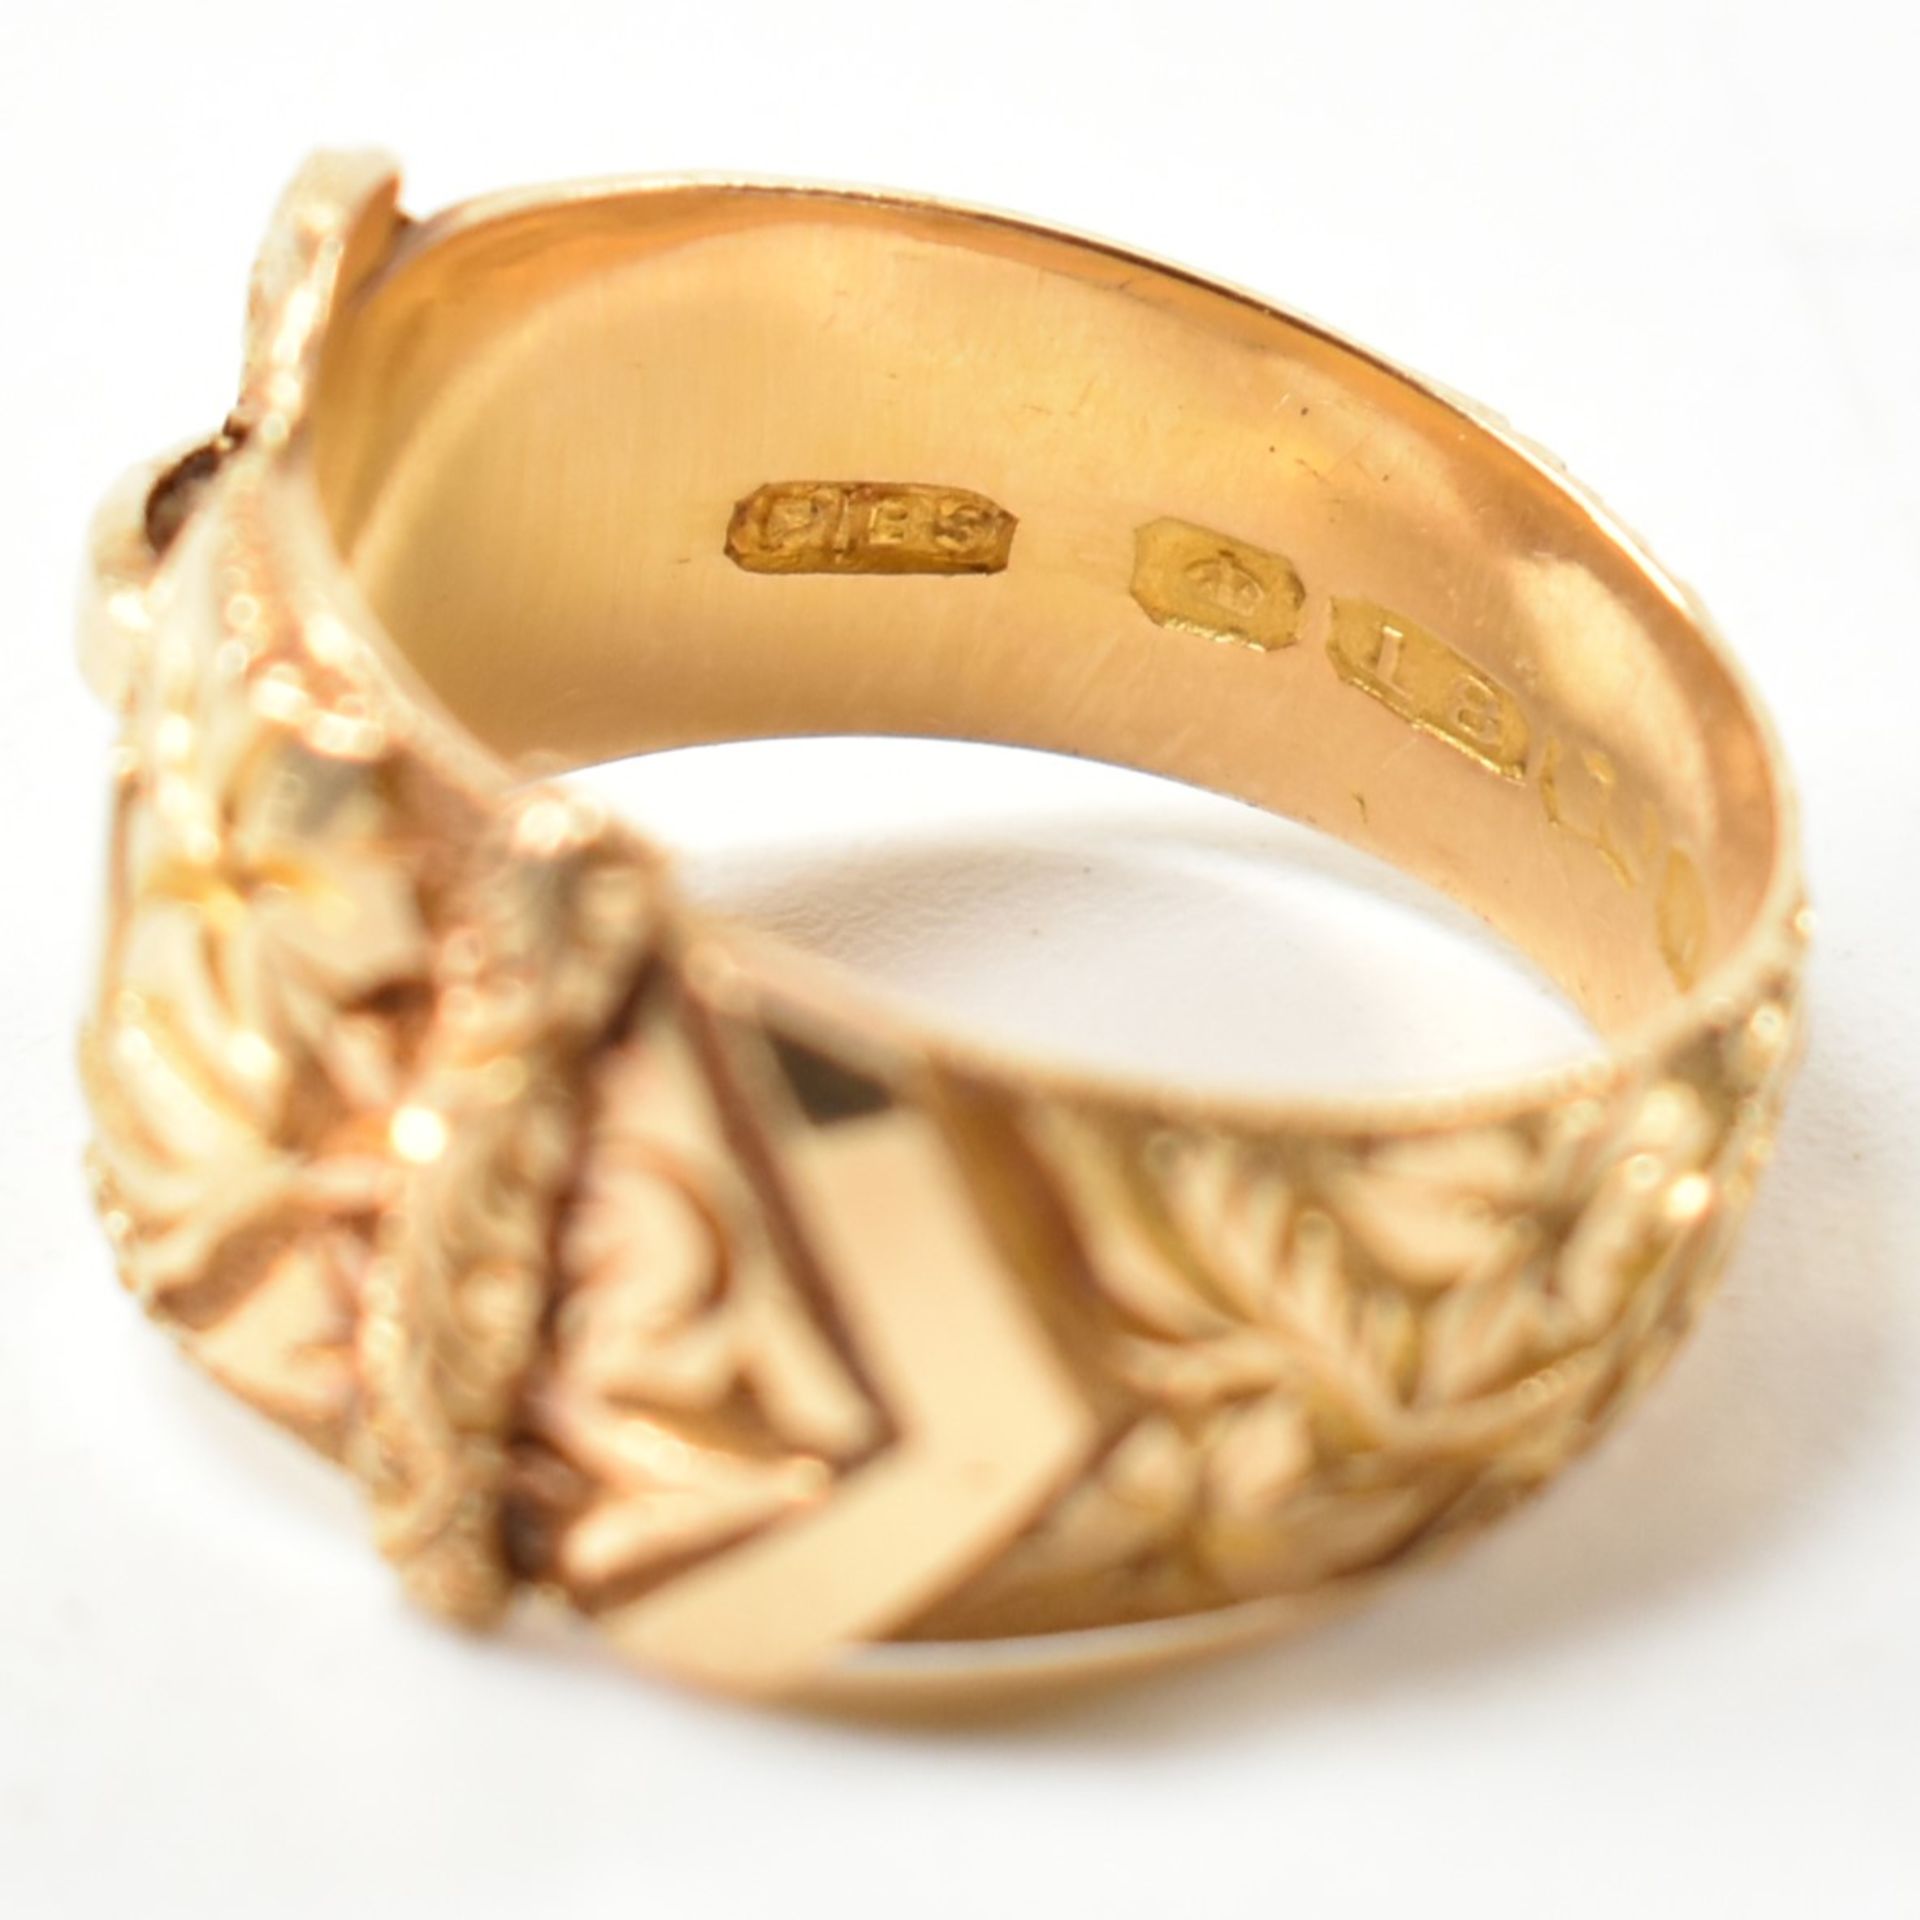 EDWARDIAN HALLMARKED 18CT GOLD BUCKLE RING - Image 8 of 9